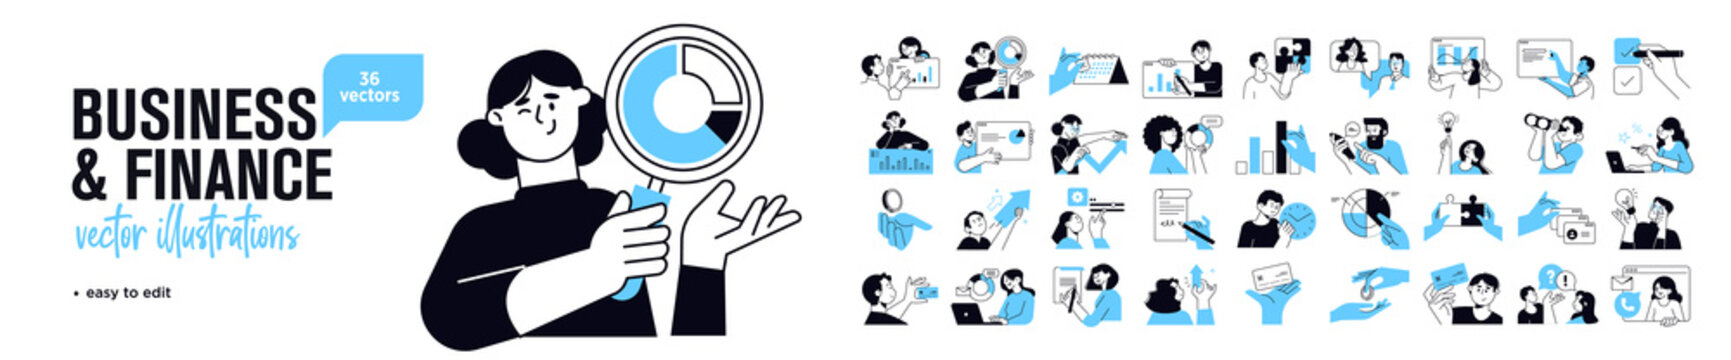 Business and marketing concept illustrations. Set of people vector illustrations in various activities of business, management, payment, market research and data analysis, communication. 